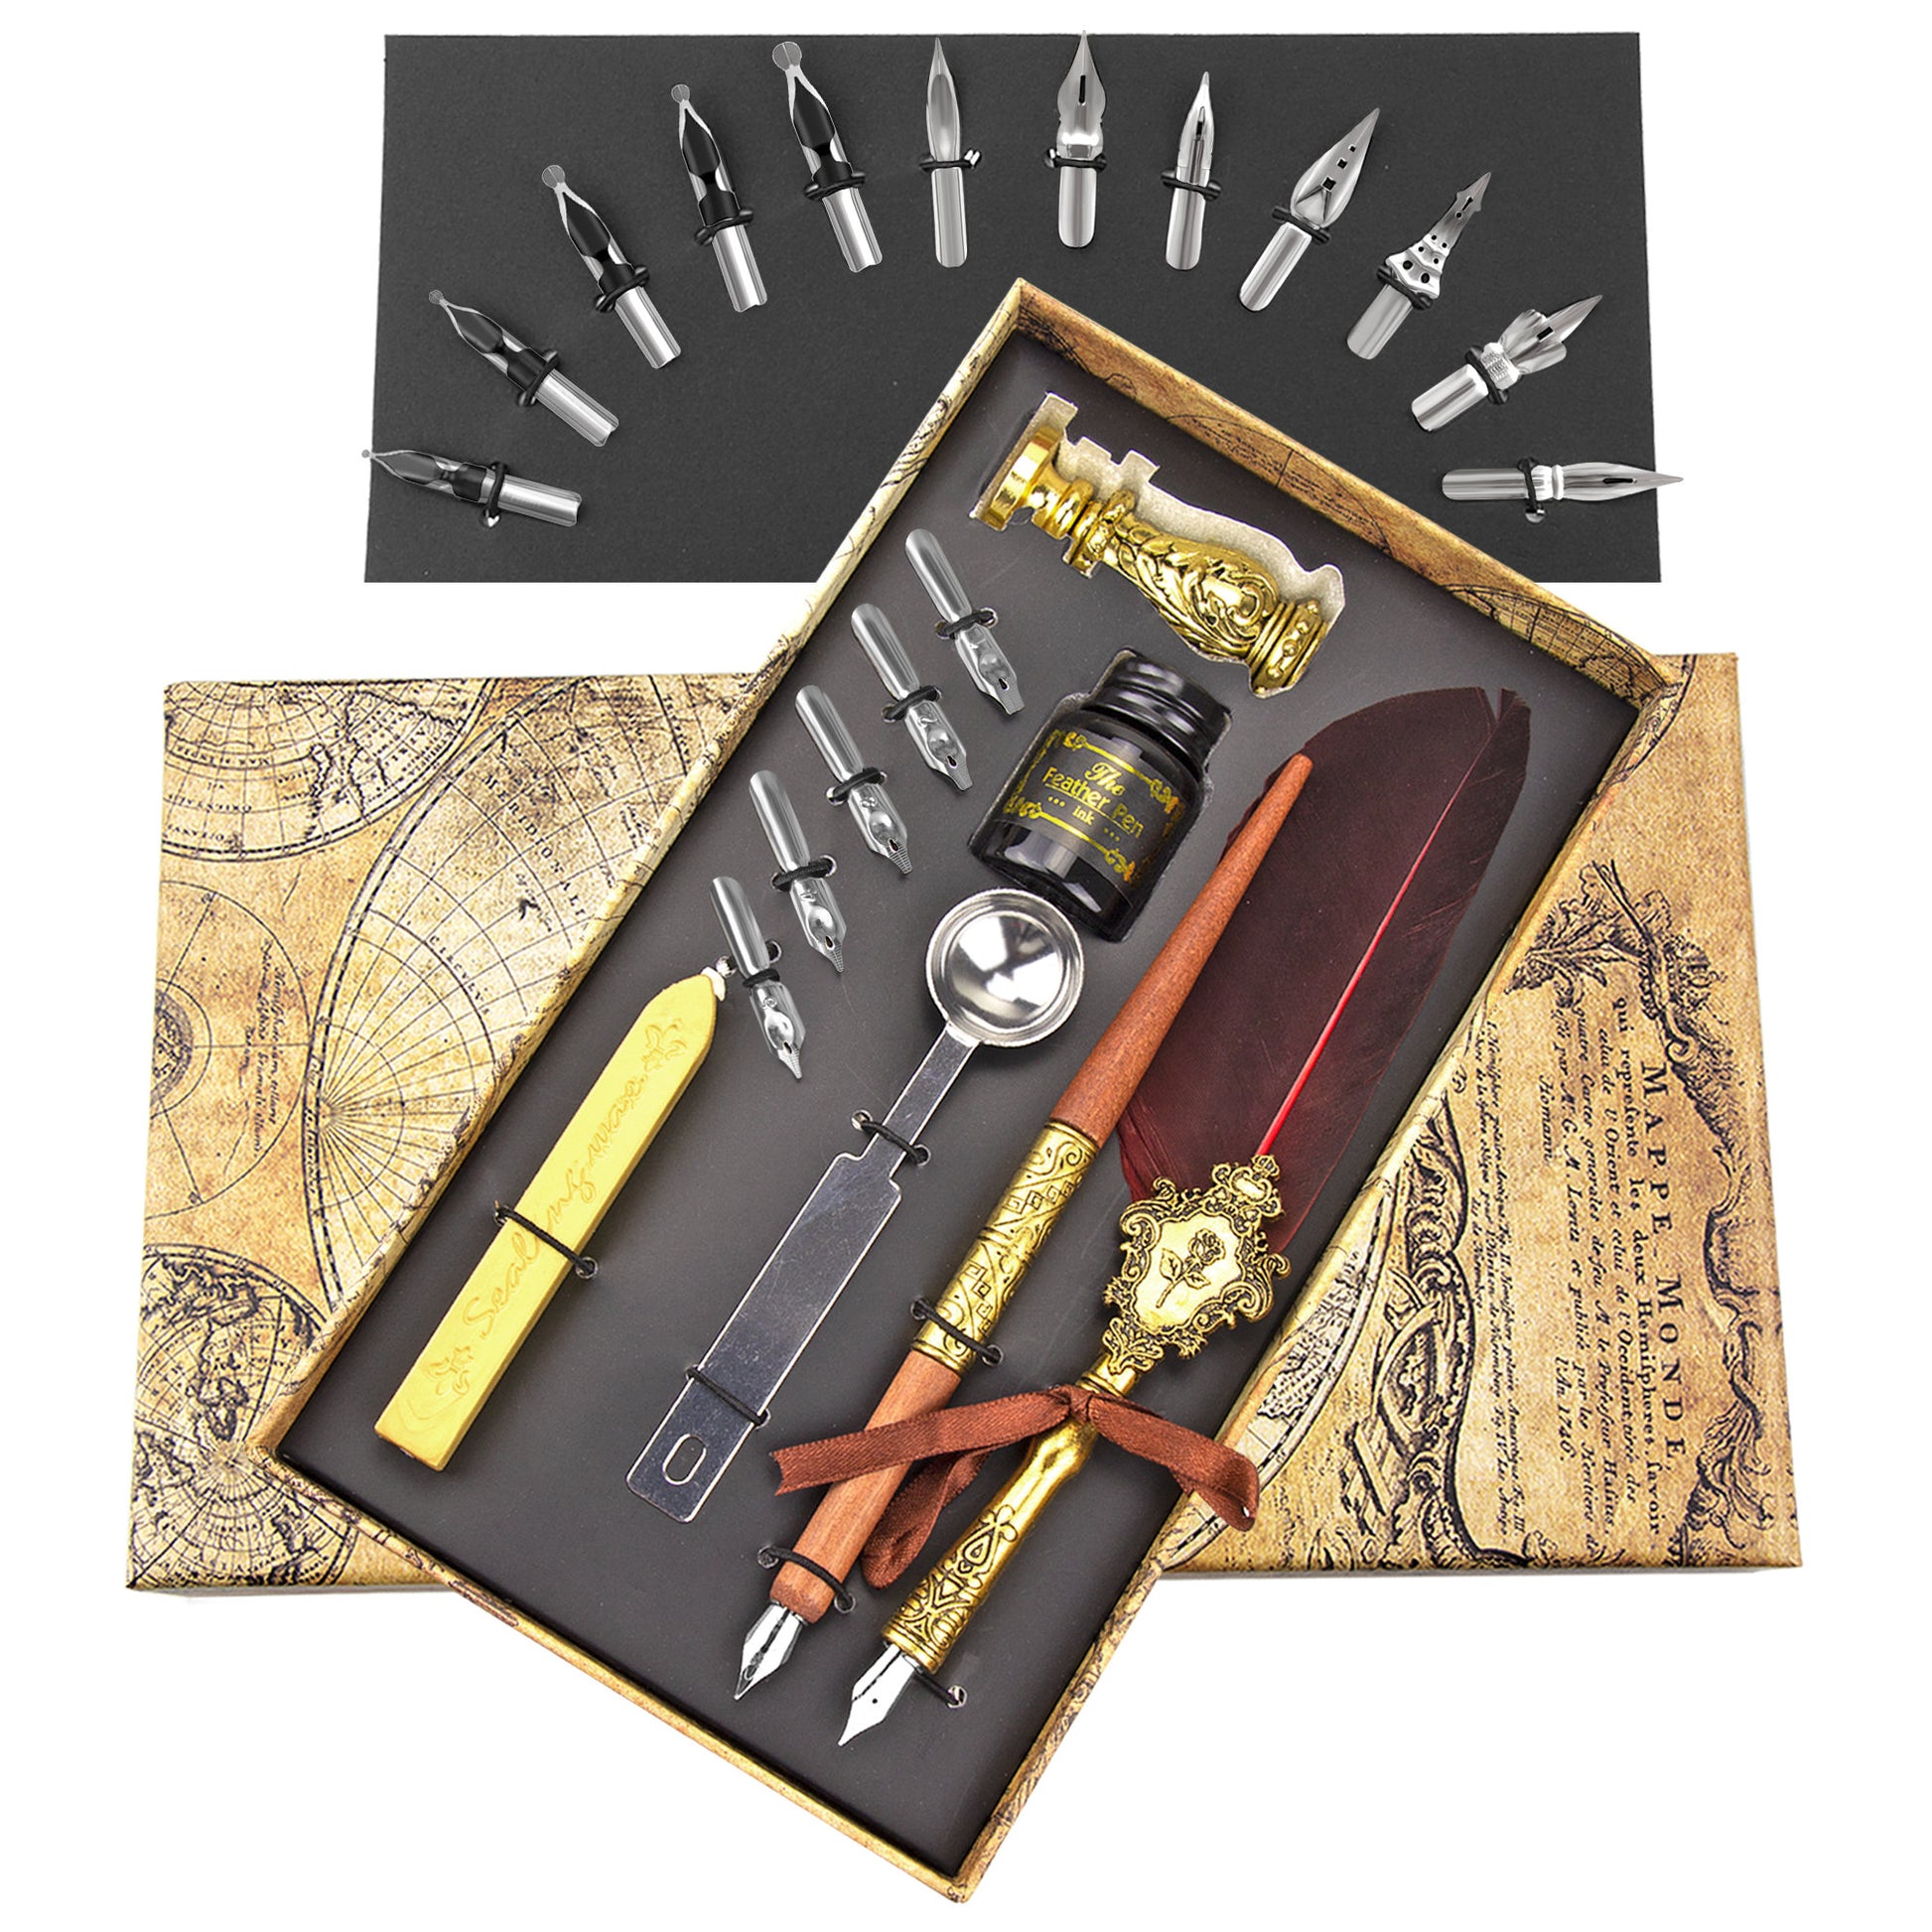 Feather Pen Set: Feather quill, wood pen, metal nibs, and ink